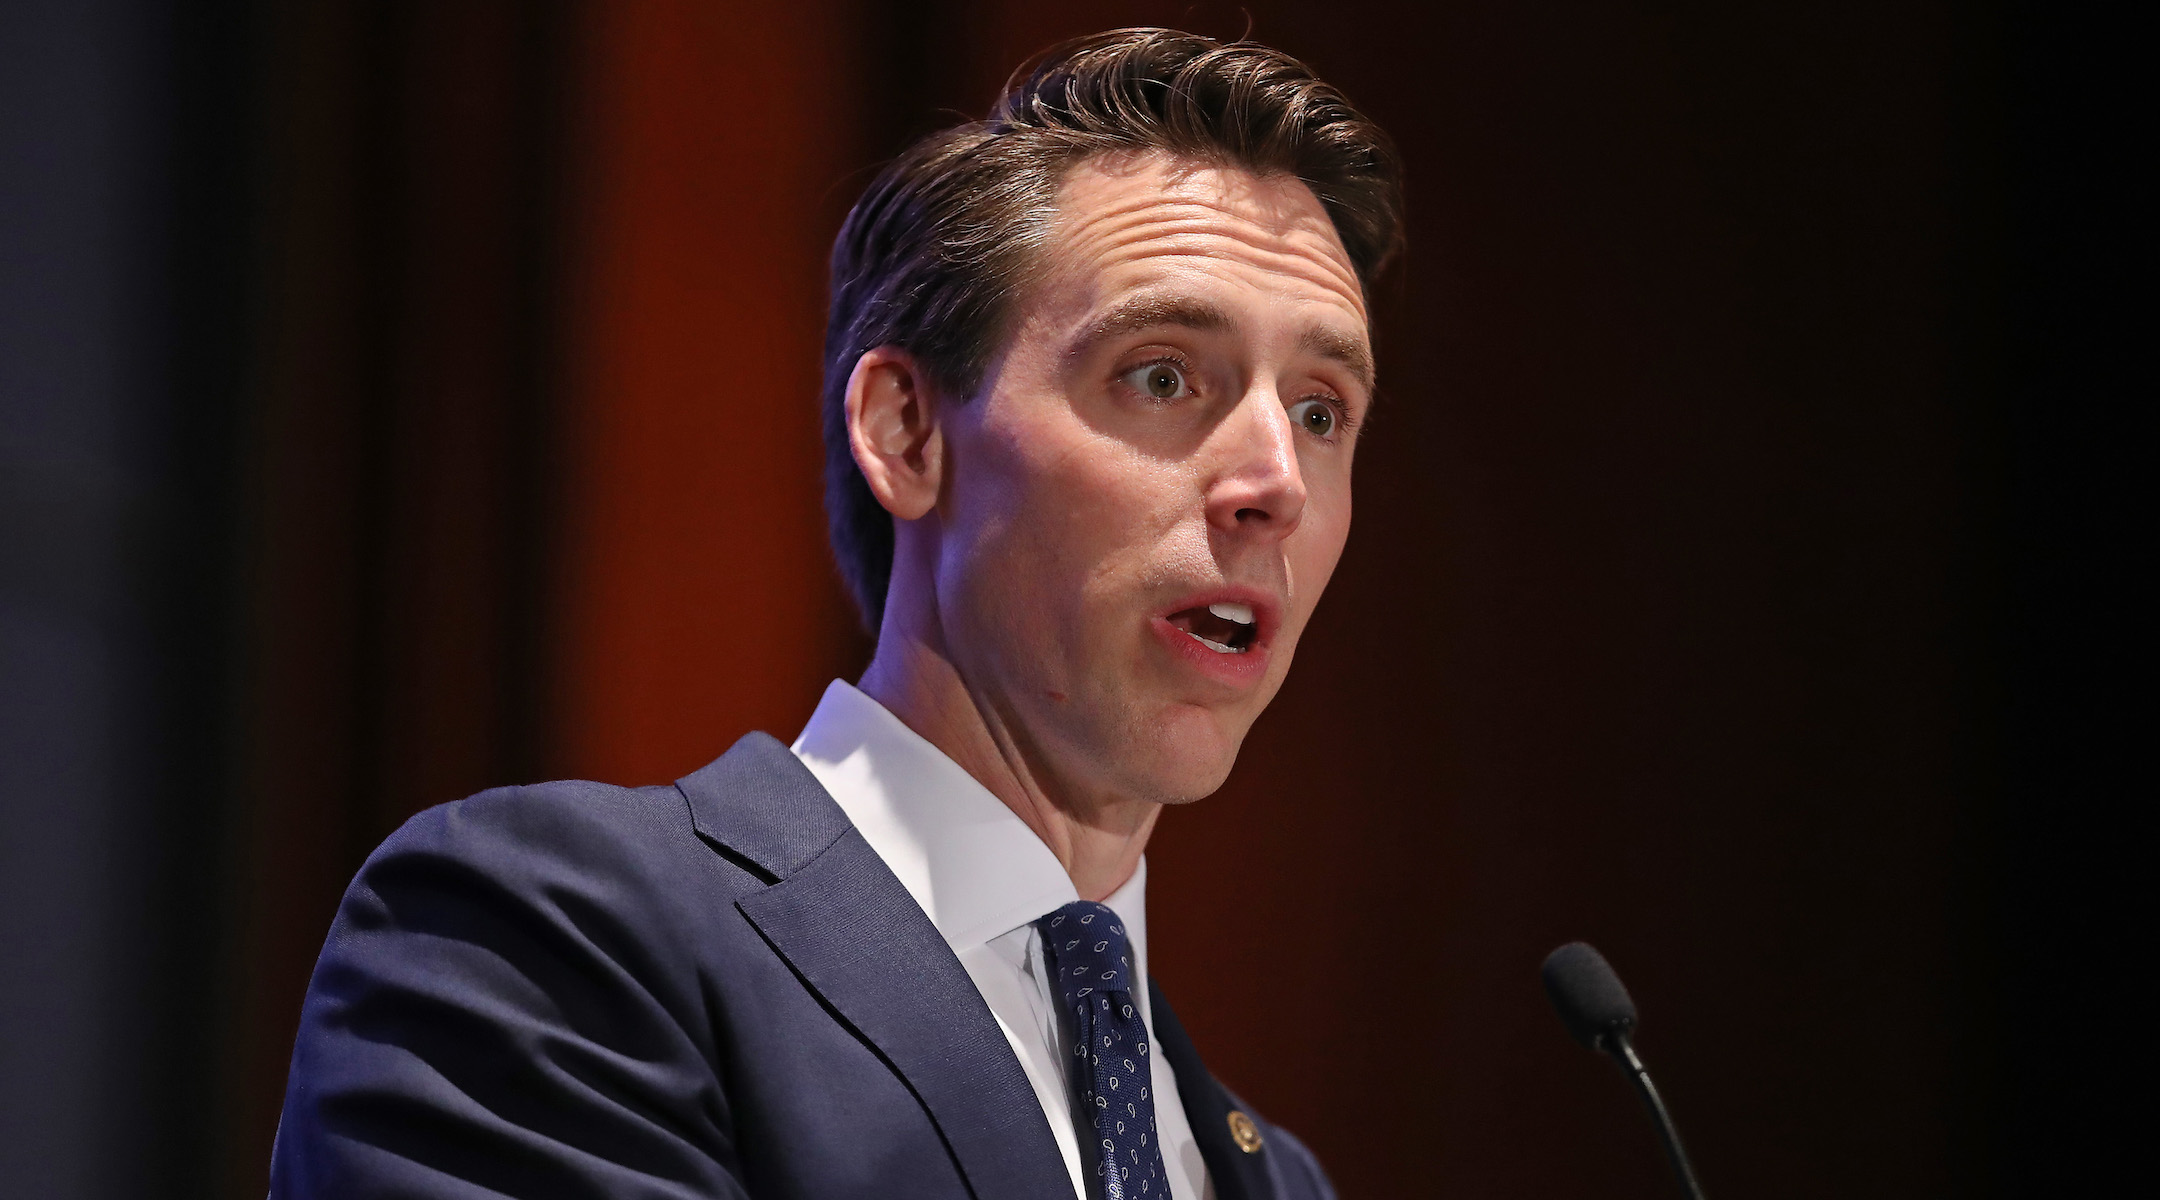 Sen. Josh Hawley (R-MO) addresses the Faith and Freedom Coalition's Road to Majority Policy Conference in Washington, DC on June 27, 2019. (Chip Somodevilla/Getty Images)